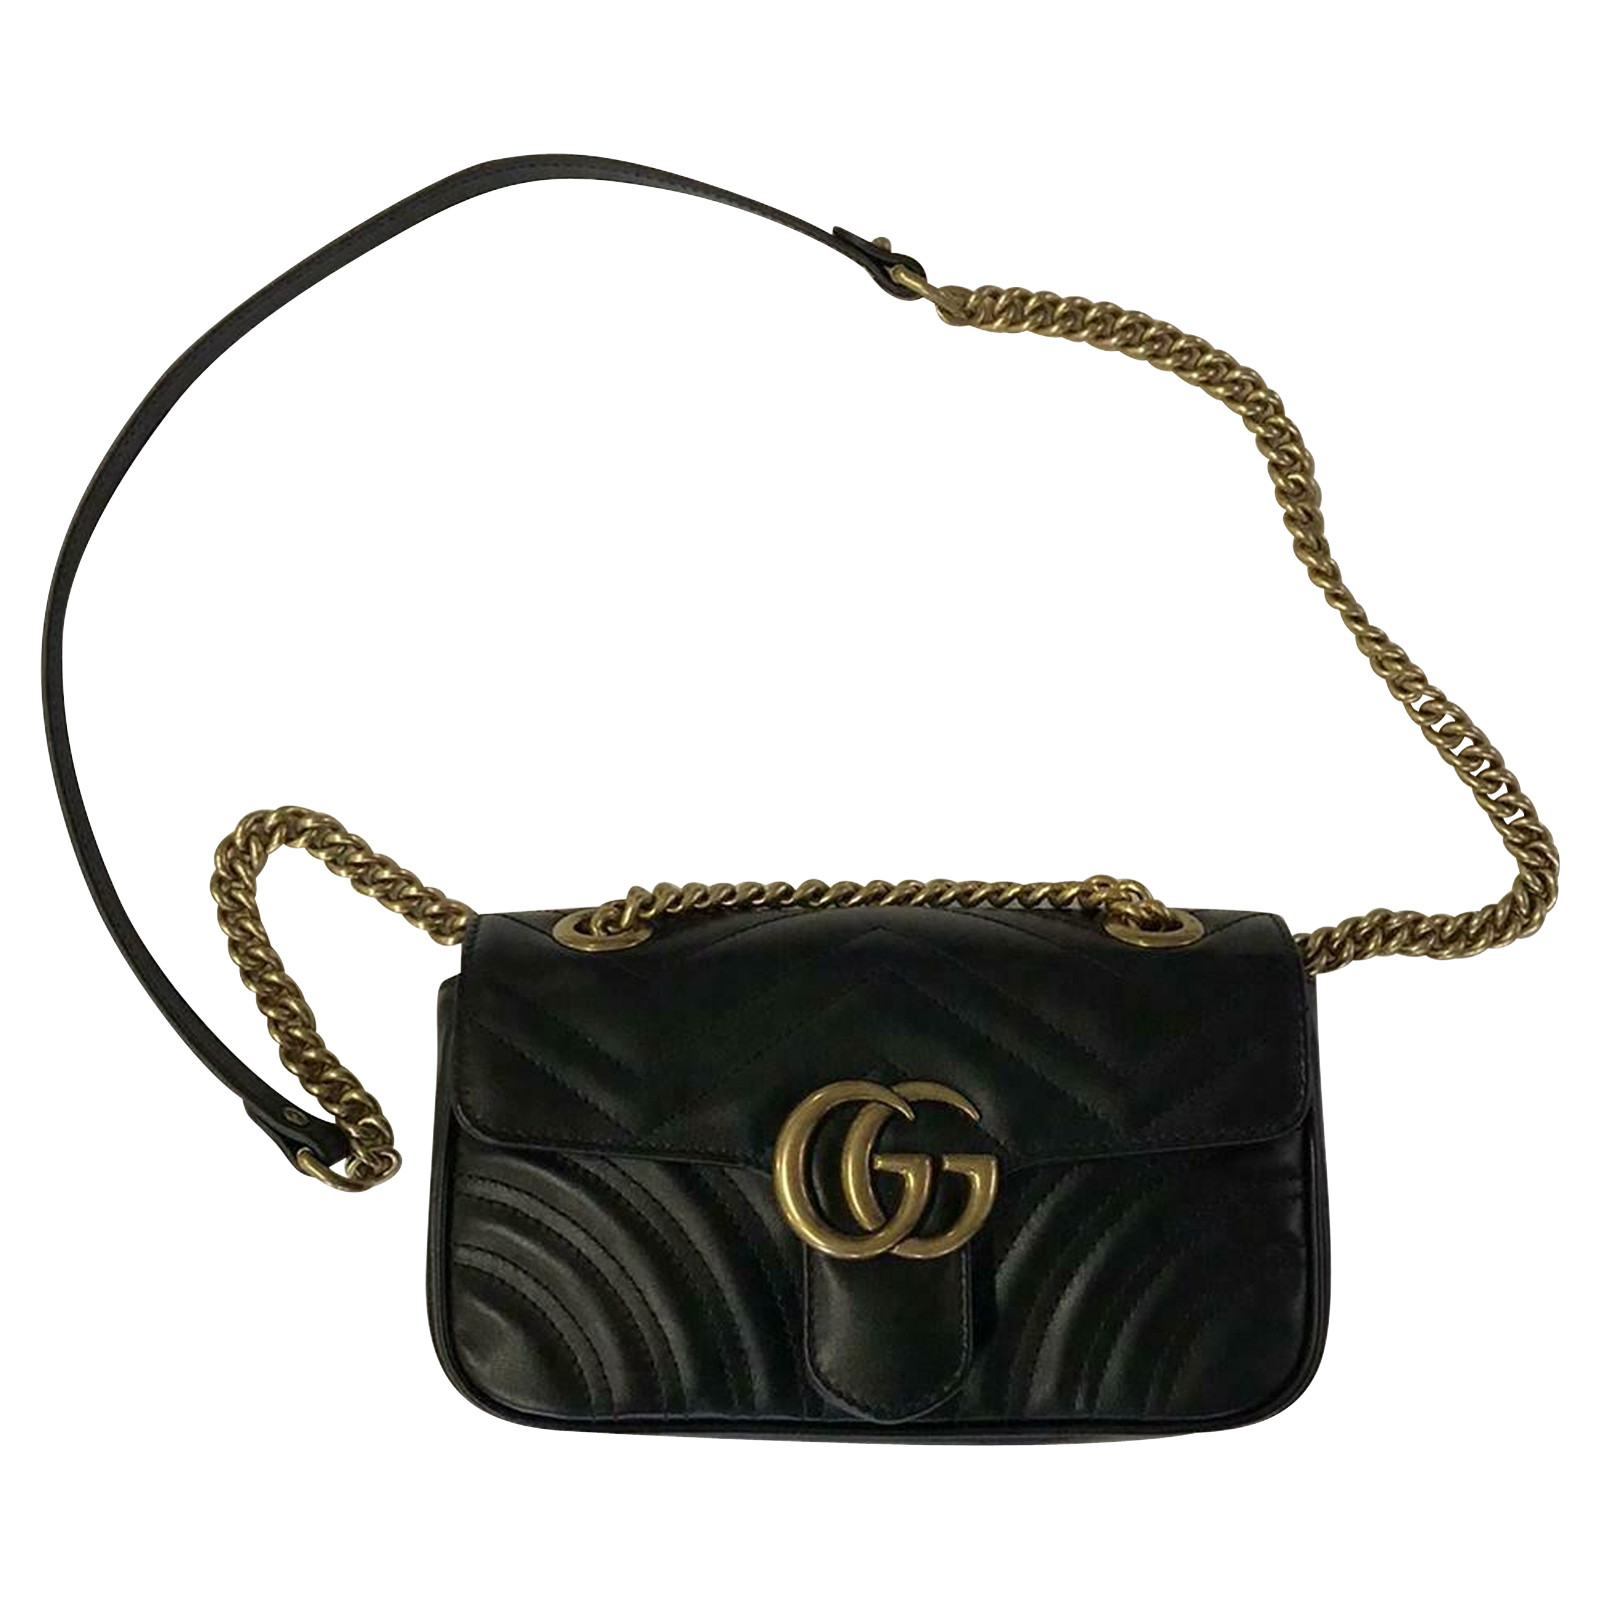 Gucci Marmont Bag Leather in Black - Second Hand Bag in Black buy used for (4463390)